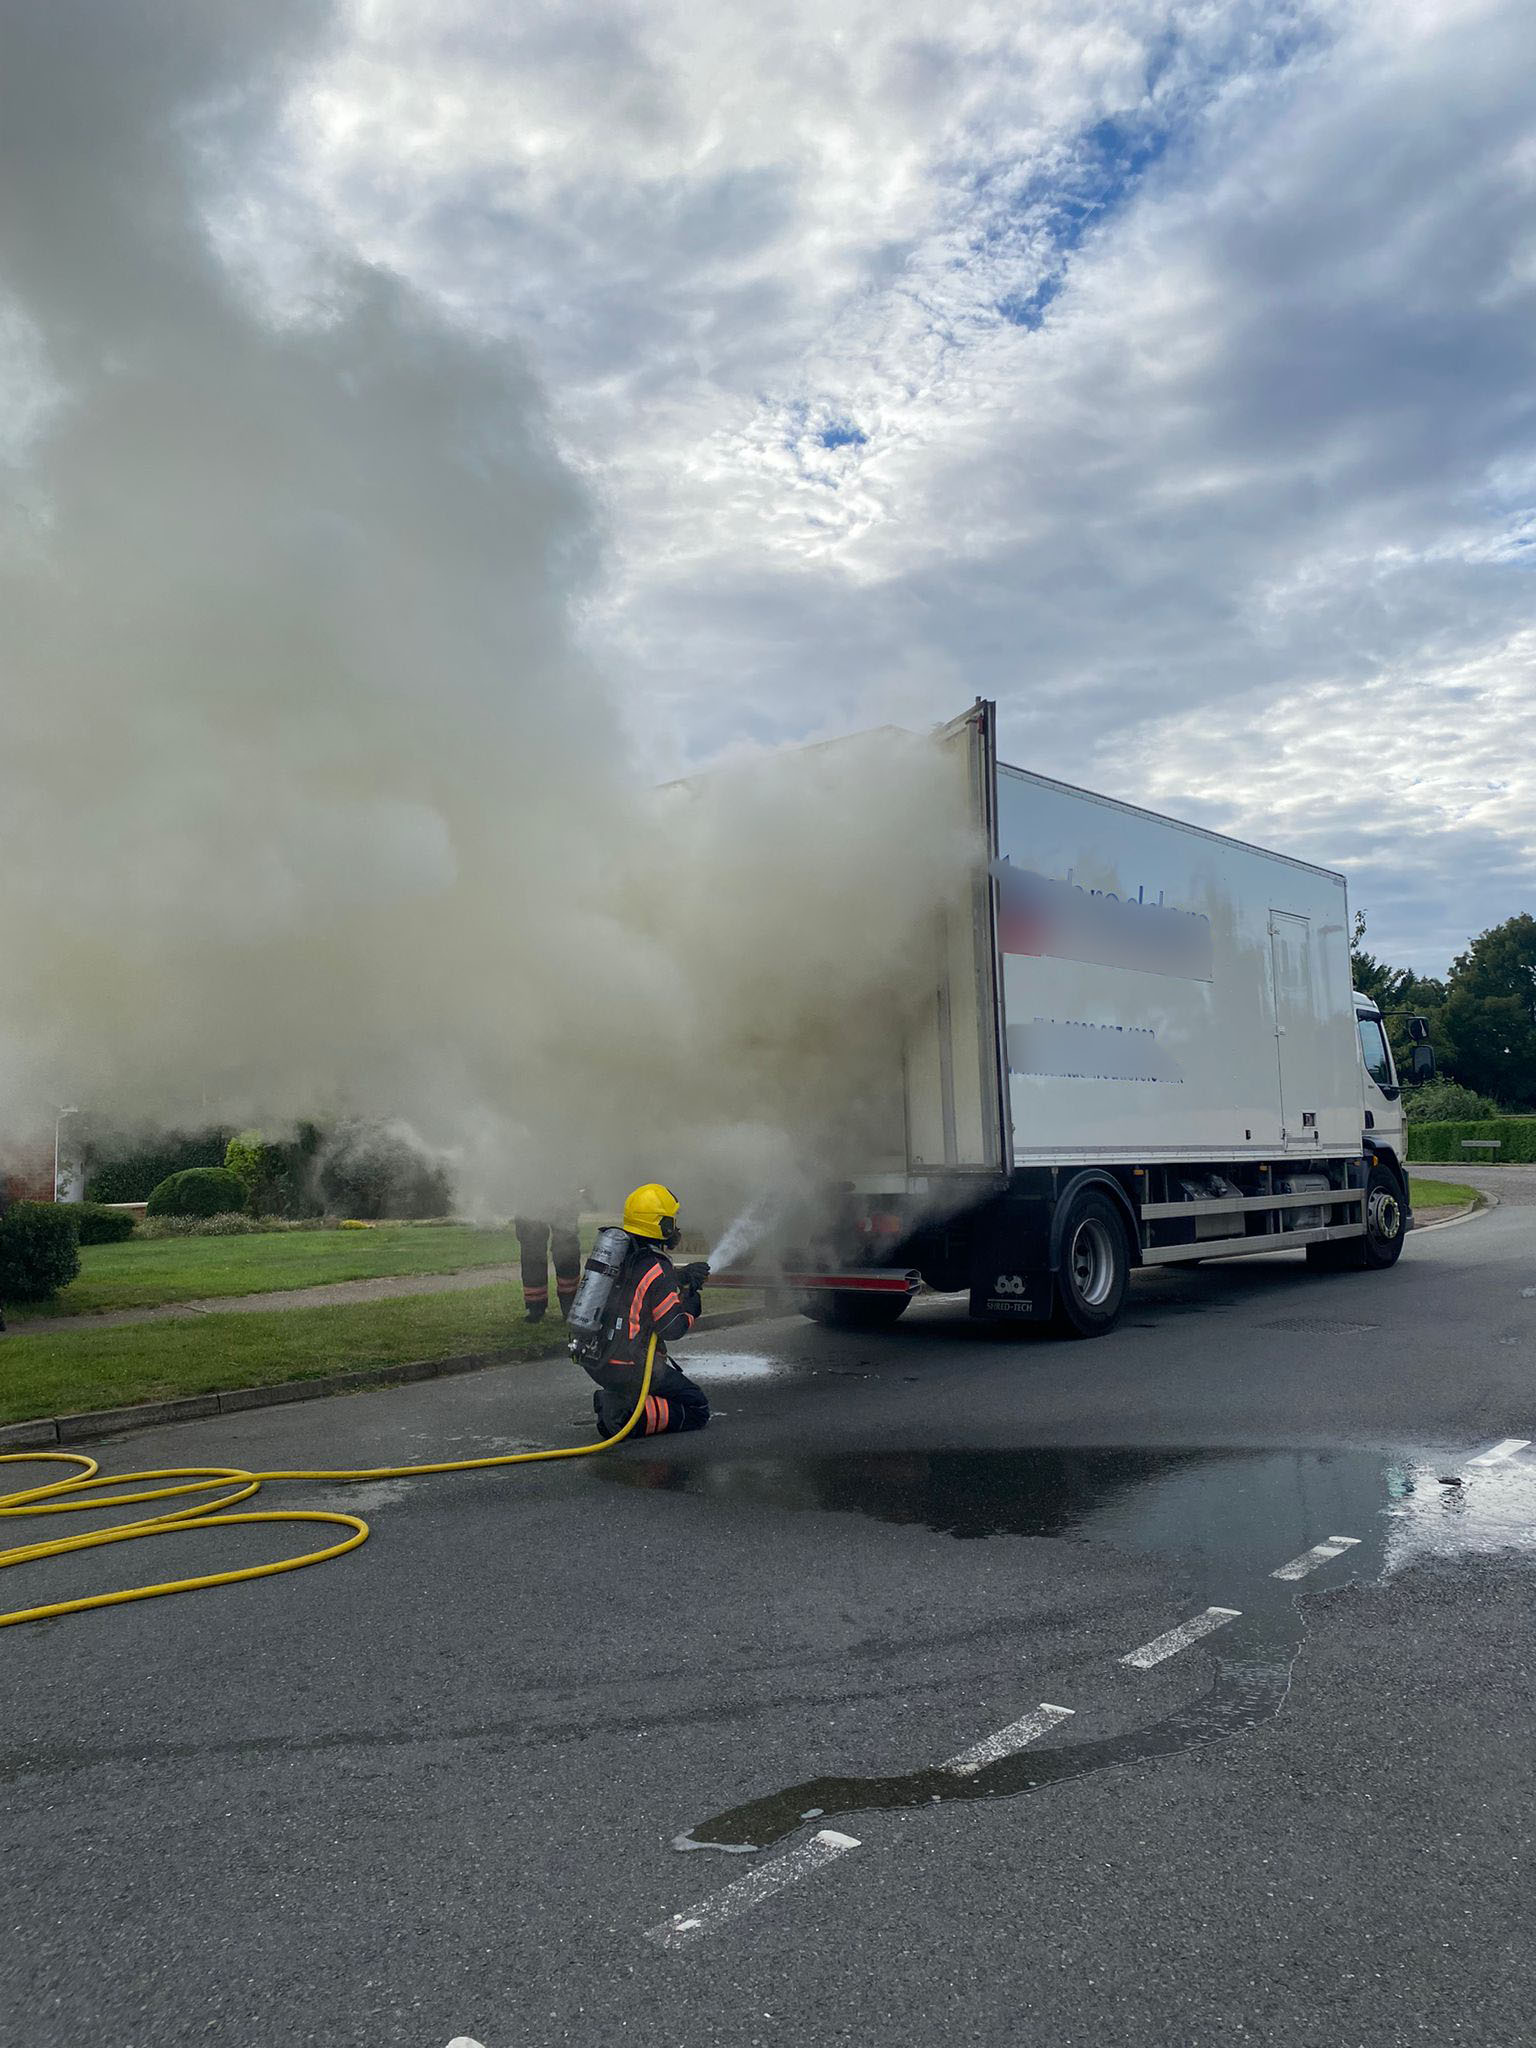 Firefighter wearing breathing apparatus using a hose reel to extinguish a fire in the back of a lorry.